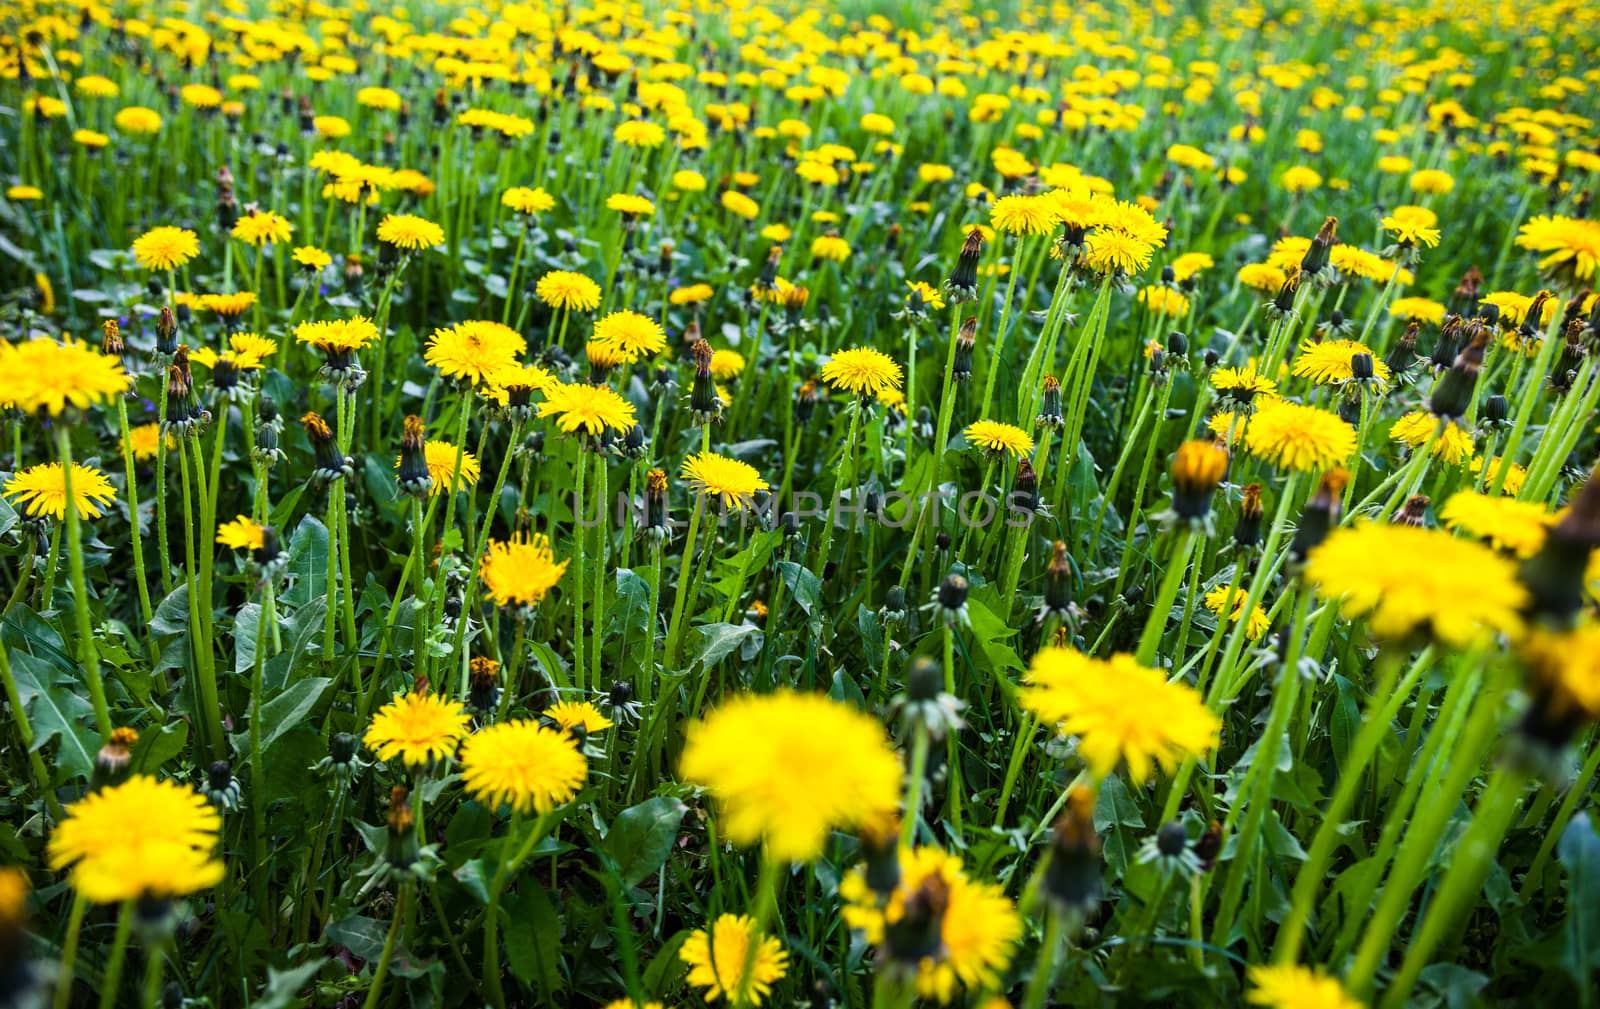 Meadow with lots of blooming yellow dandelions